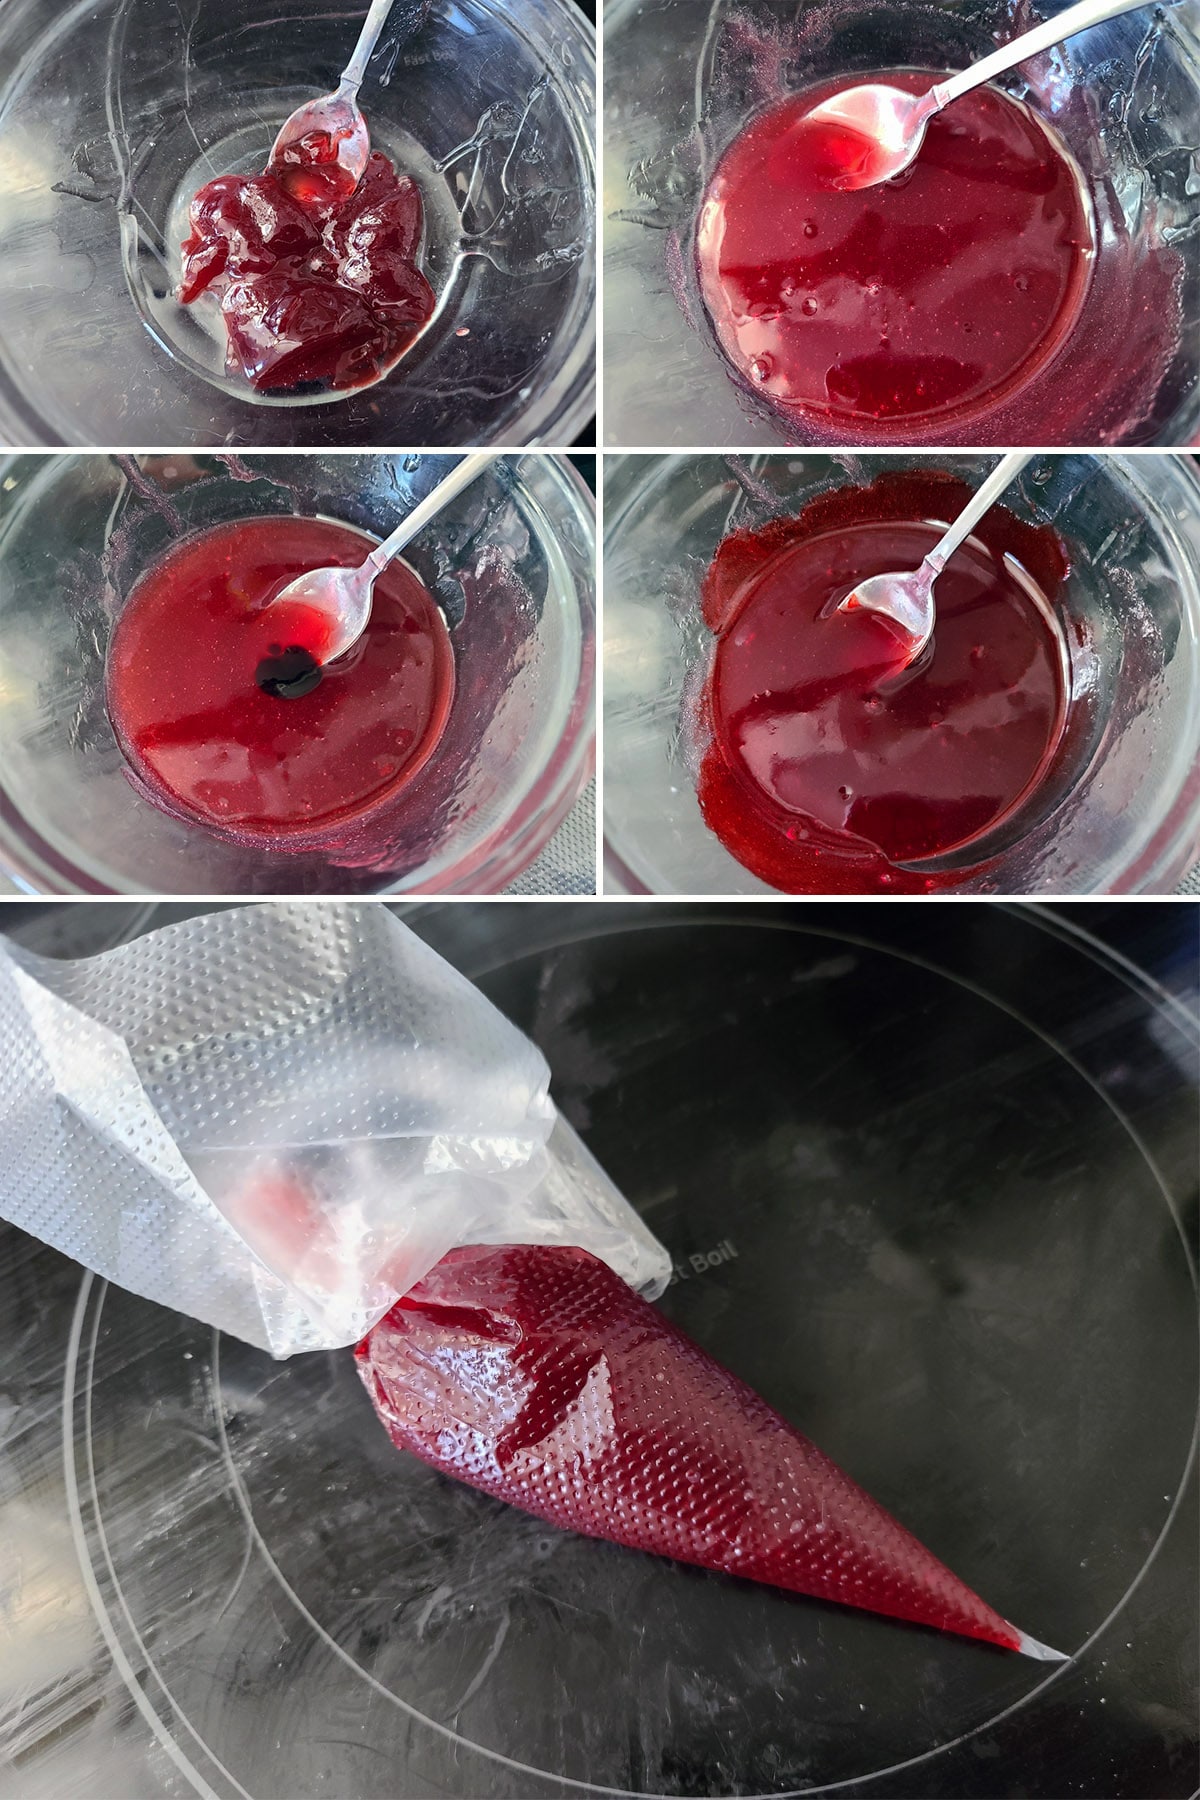 A 5 part image showing the jam "blood" being mixed and put in a disposable piping bag.